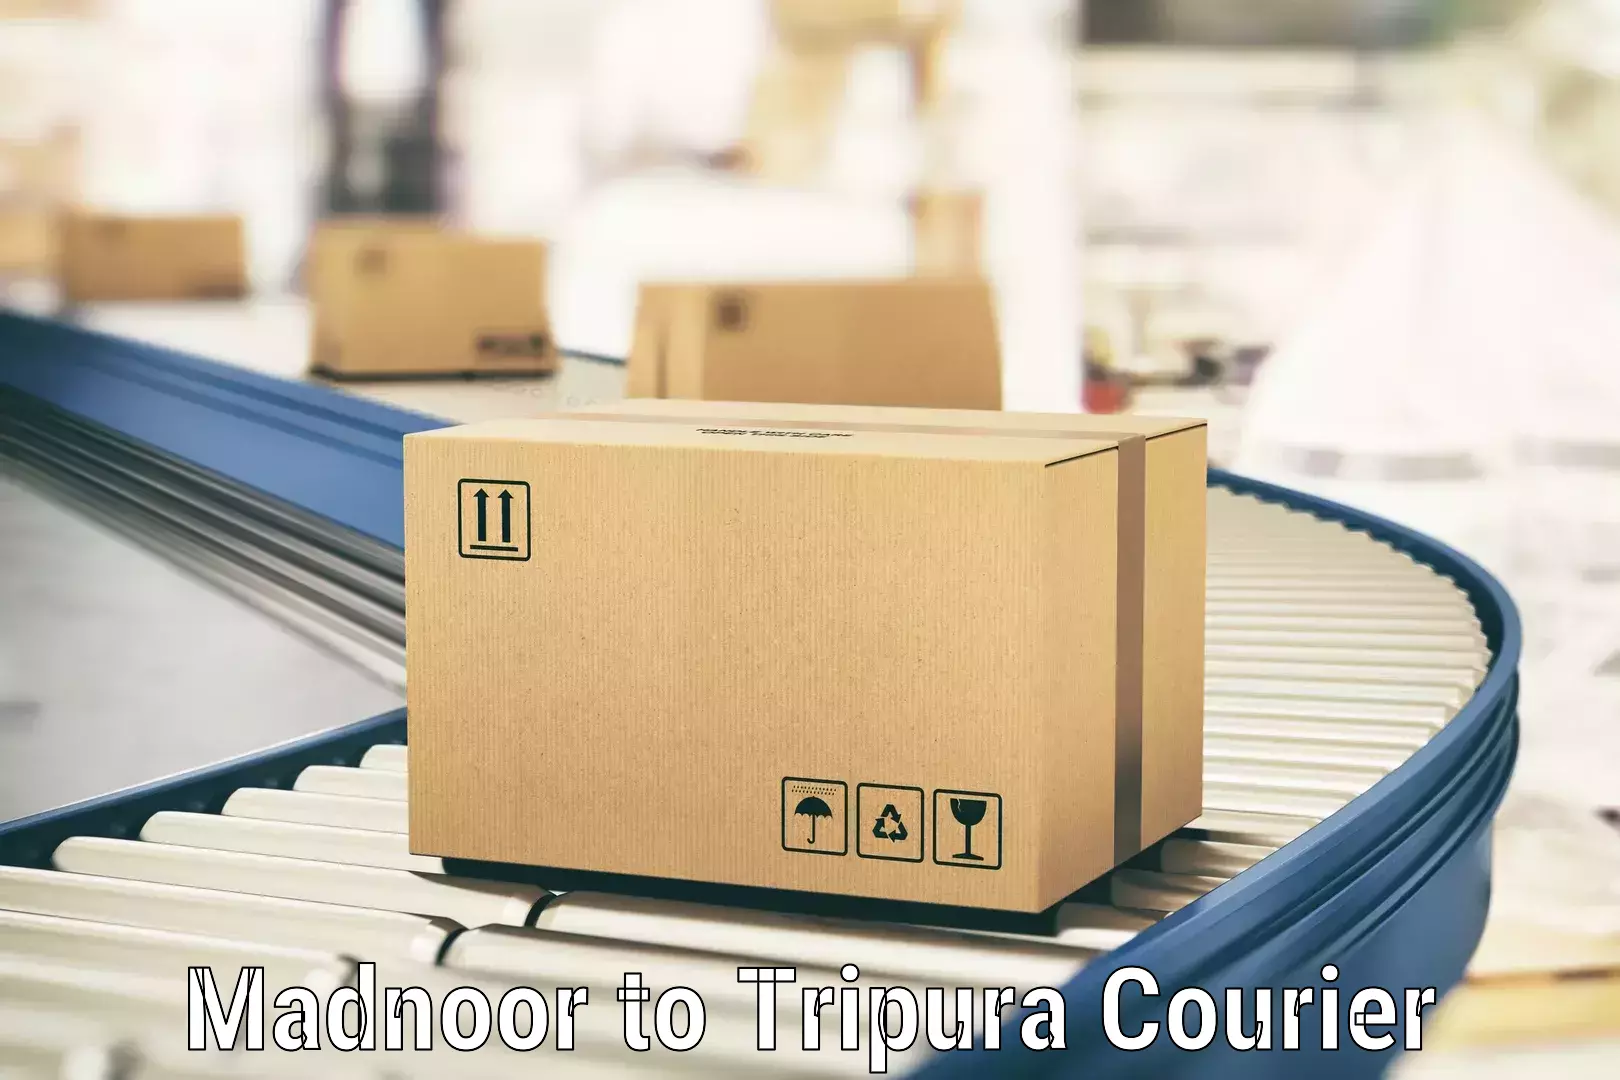 Easy access courier services Madnoor to Tripura